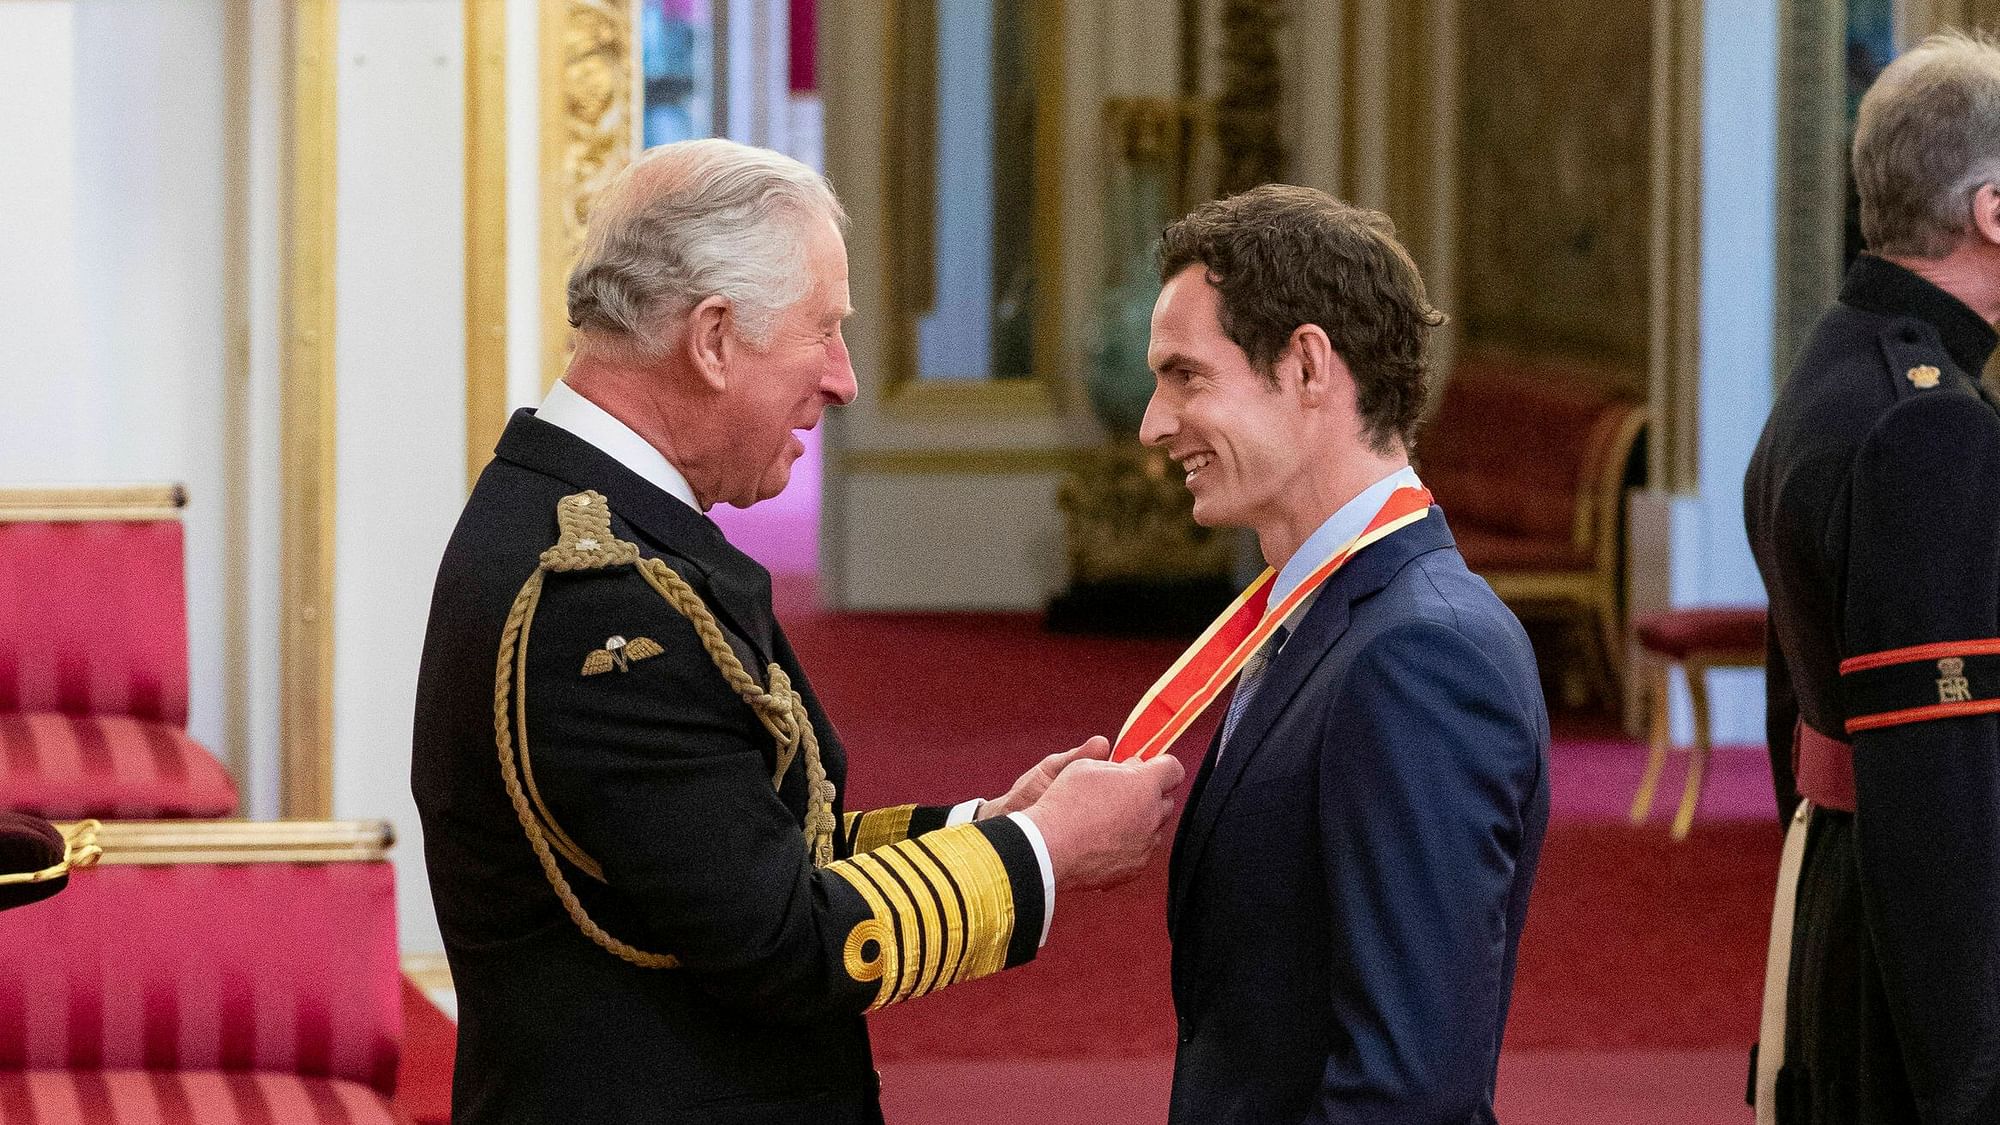 Britain’s Andy Murray receives his knighthood from Prince Charles during an investiture ceremony at Buckingham Palace, London, Thursday May 16, 2019.